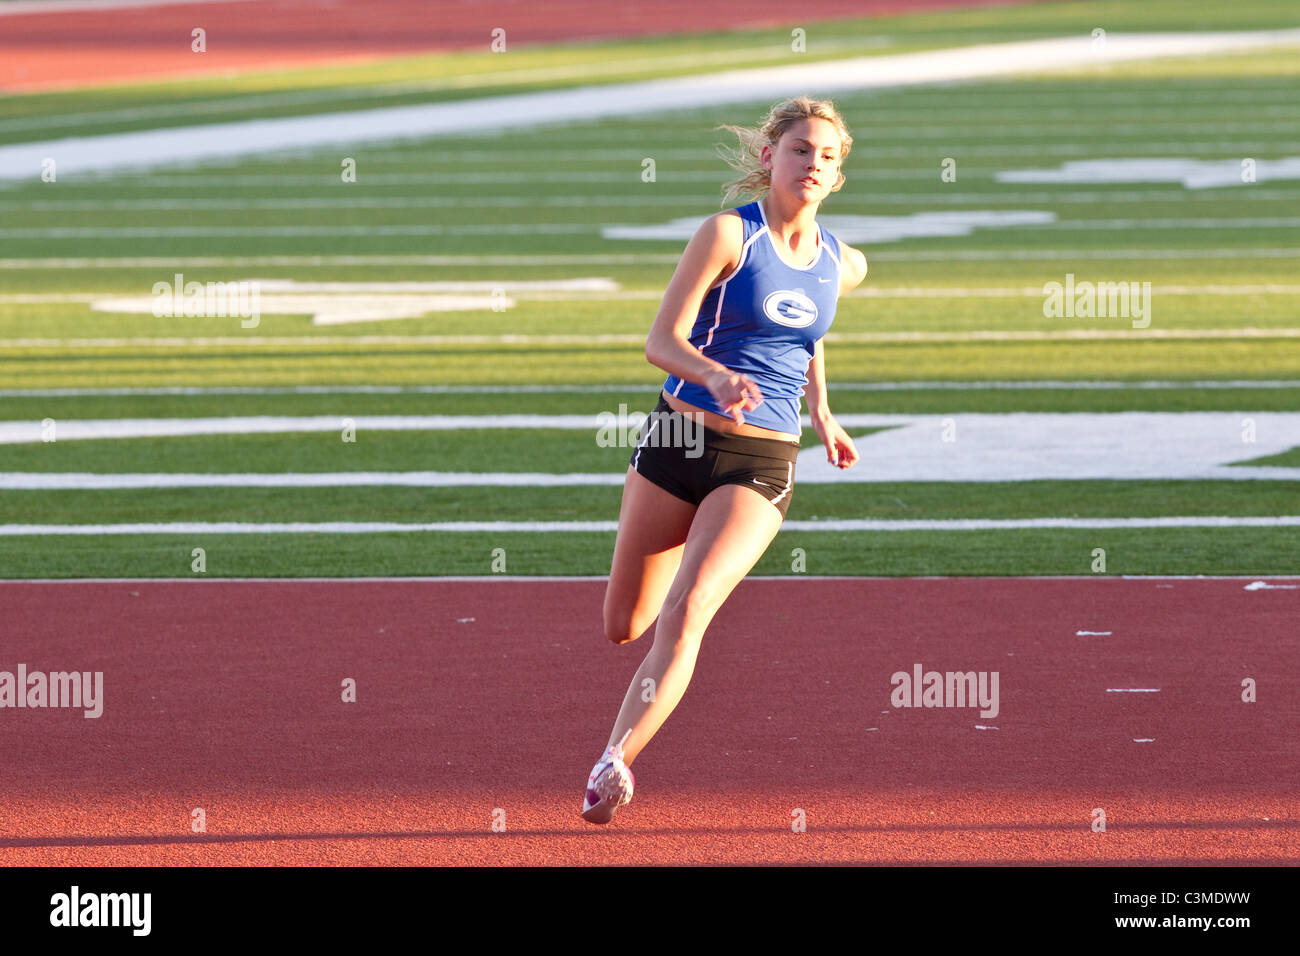 Anglo female athlete approaches high jump bar at high school track meet in San Antonio Texas Stock Photo